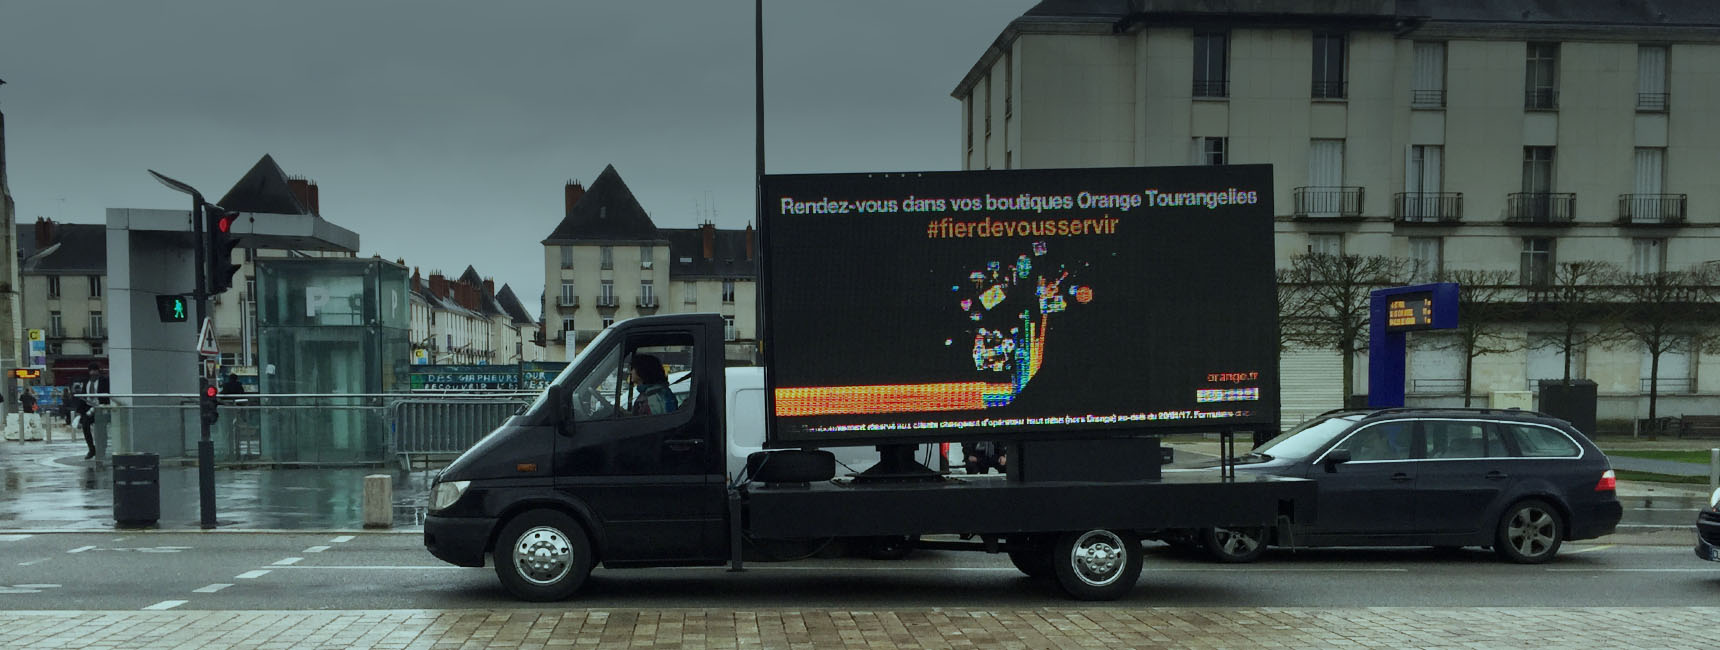 Dispositifs d'affichage mobile - Keemia Agence marketing local